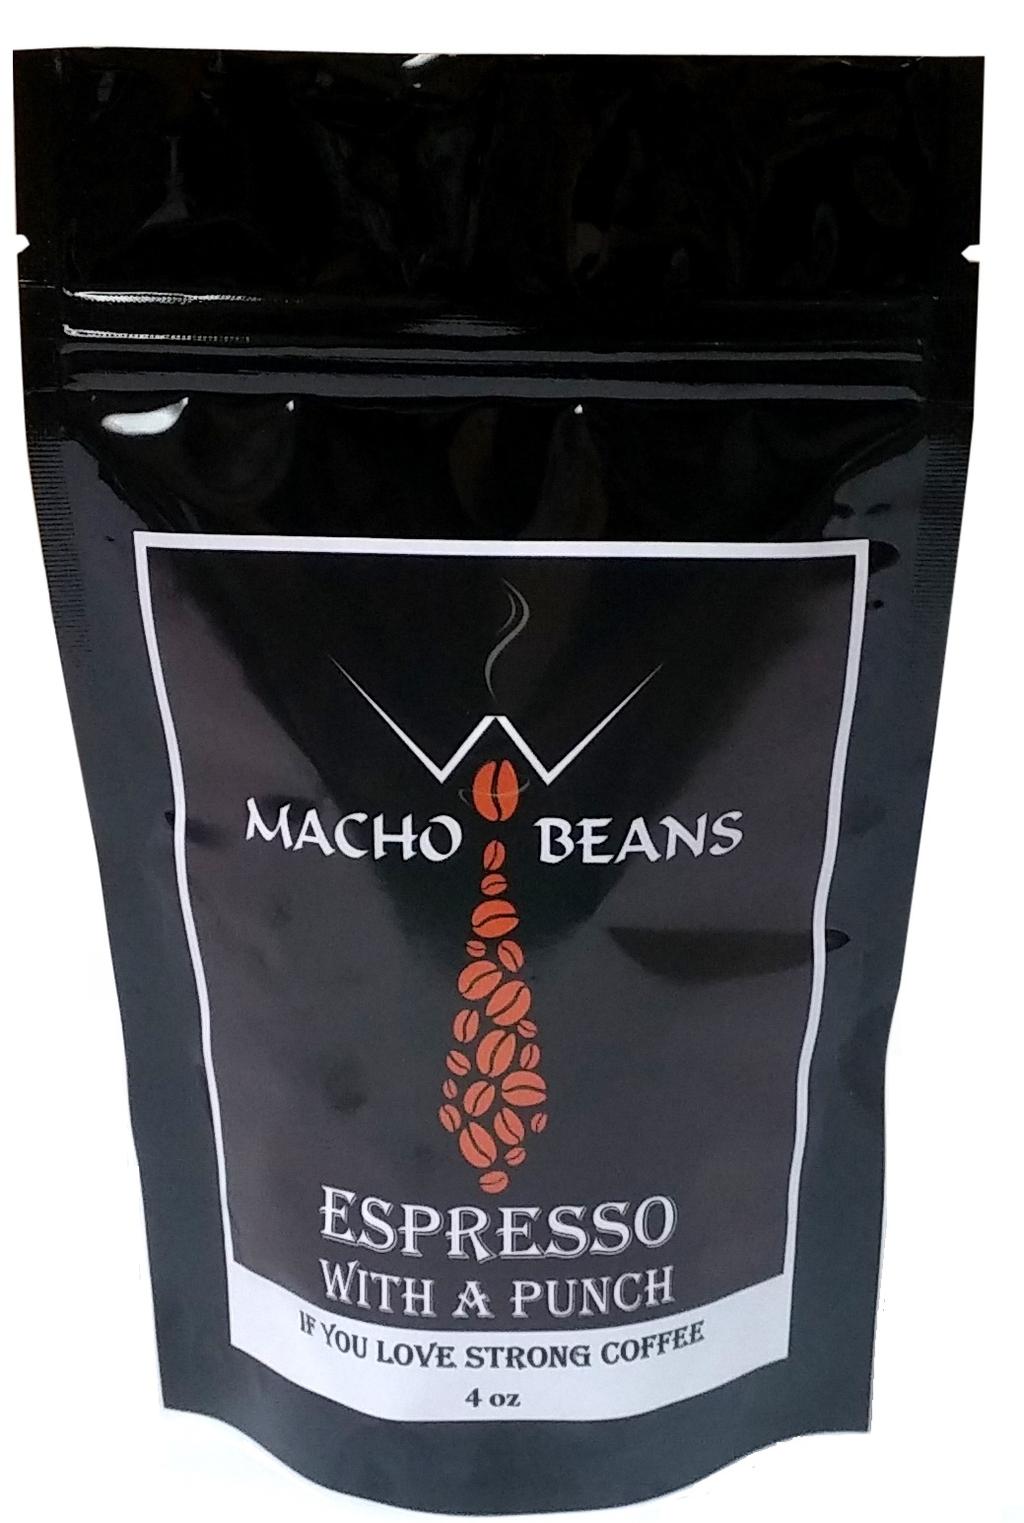 ROASTED BEANS COOLED NORMALLY WITHOUT SPRAY OF WATER MIST 16-OZ.